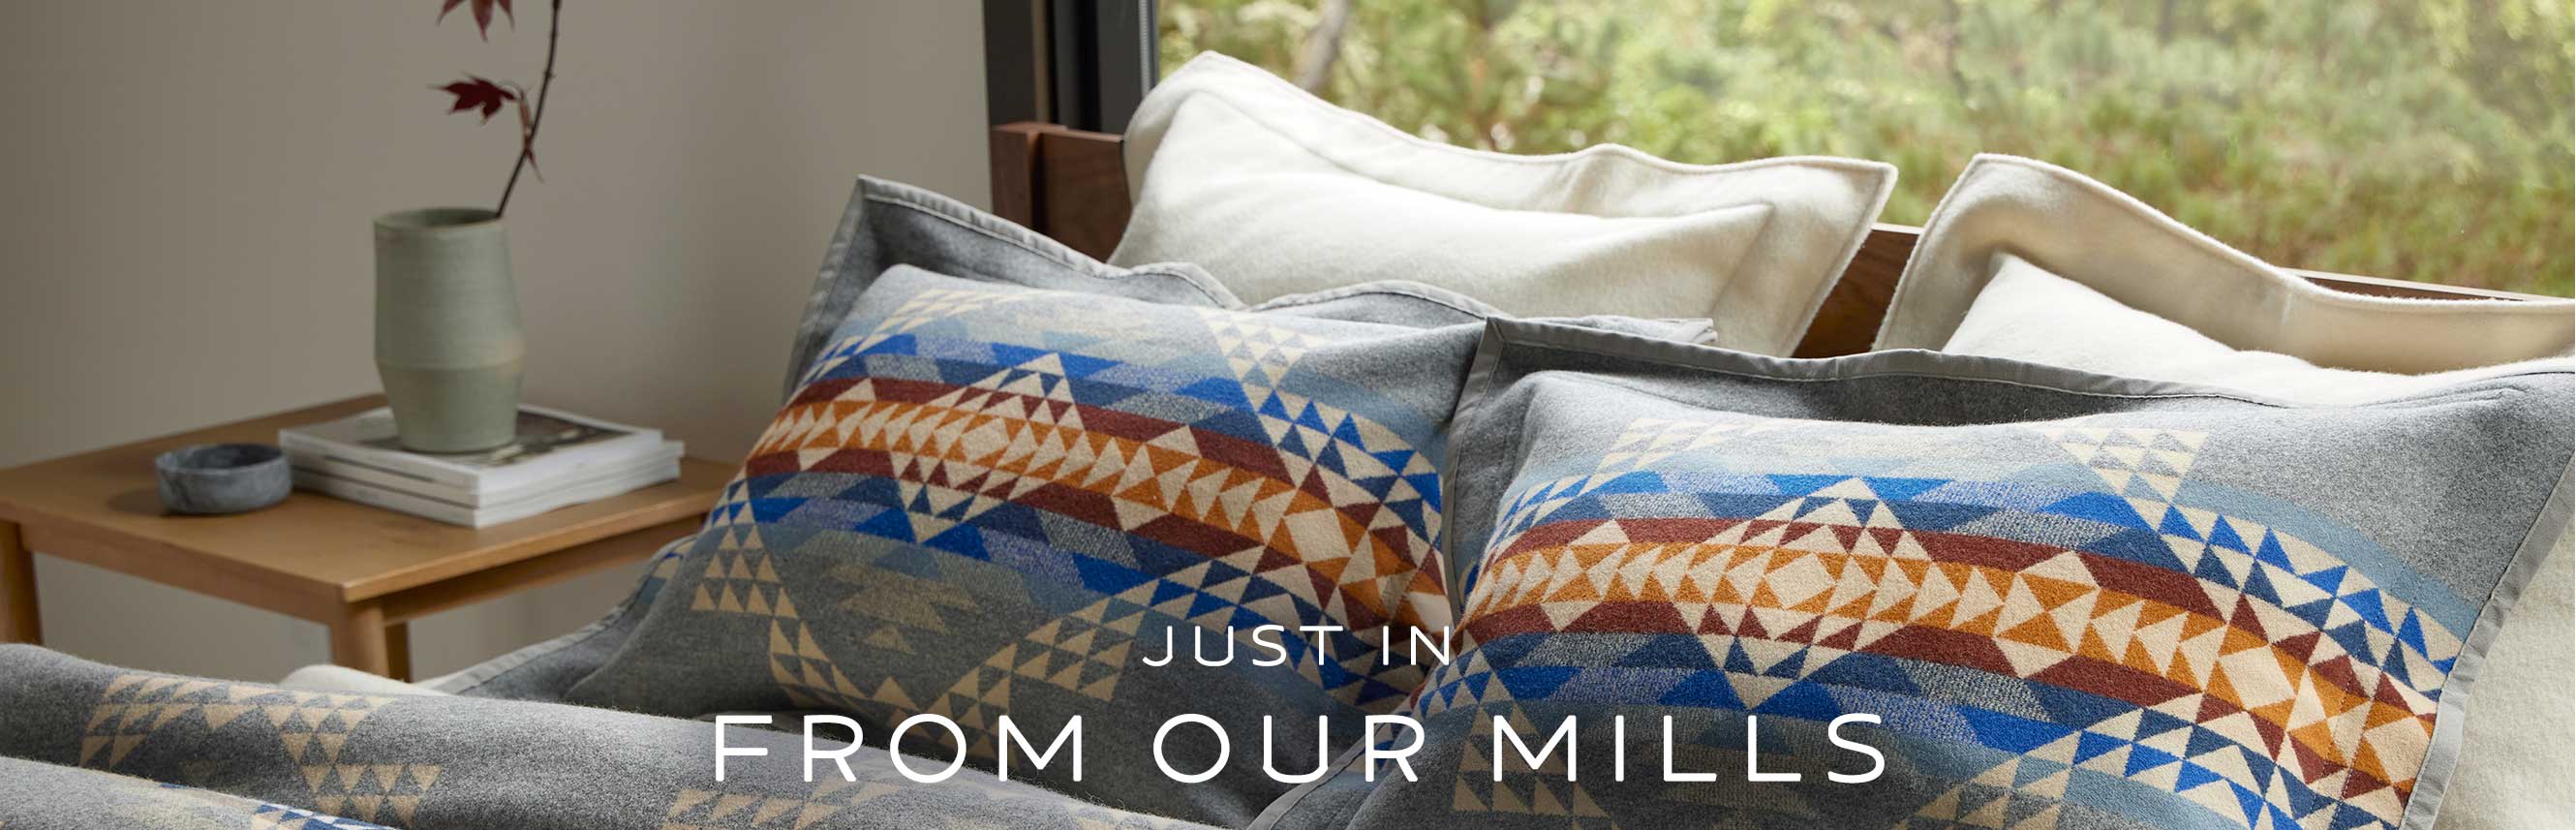 New Blankets Just In From Our Mills